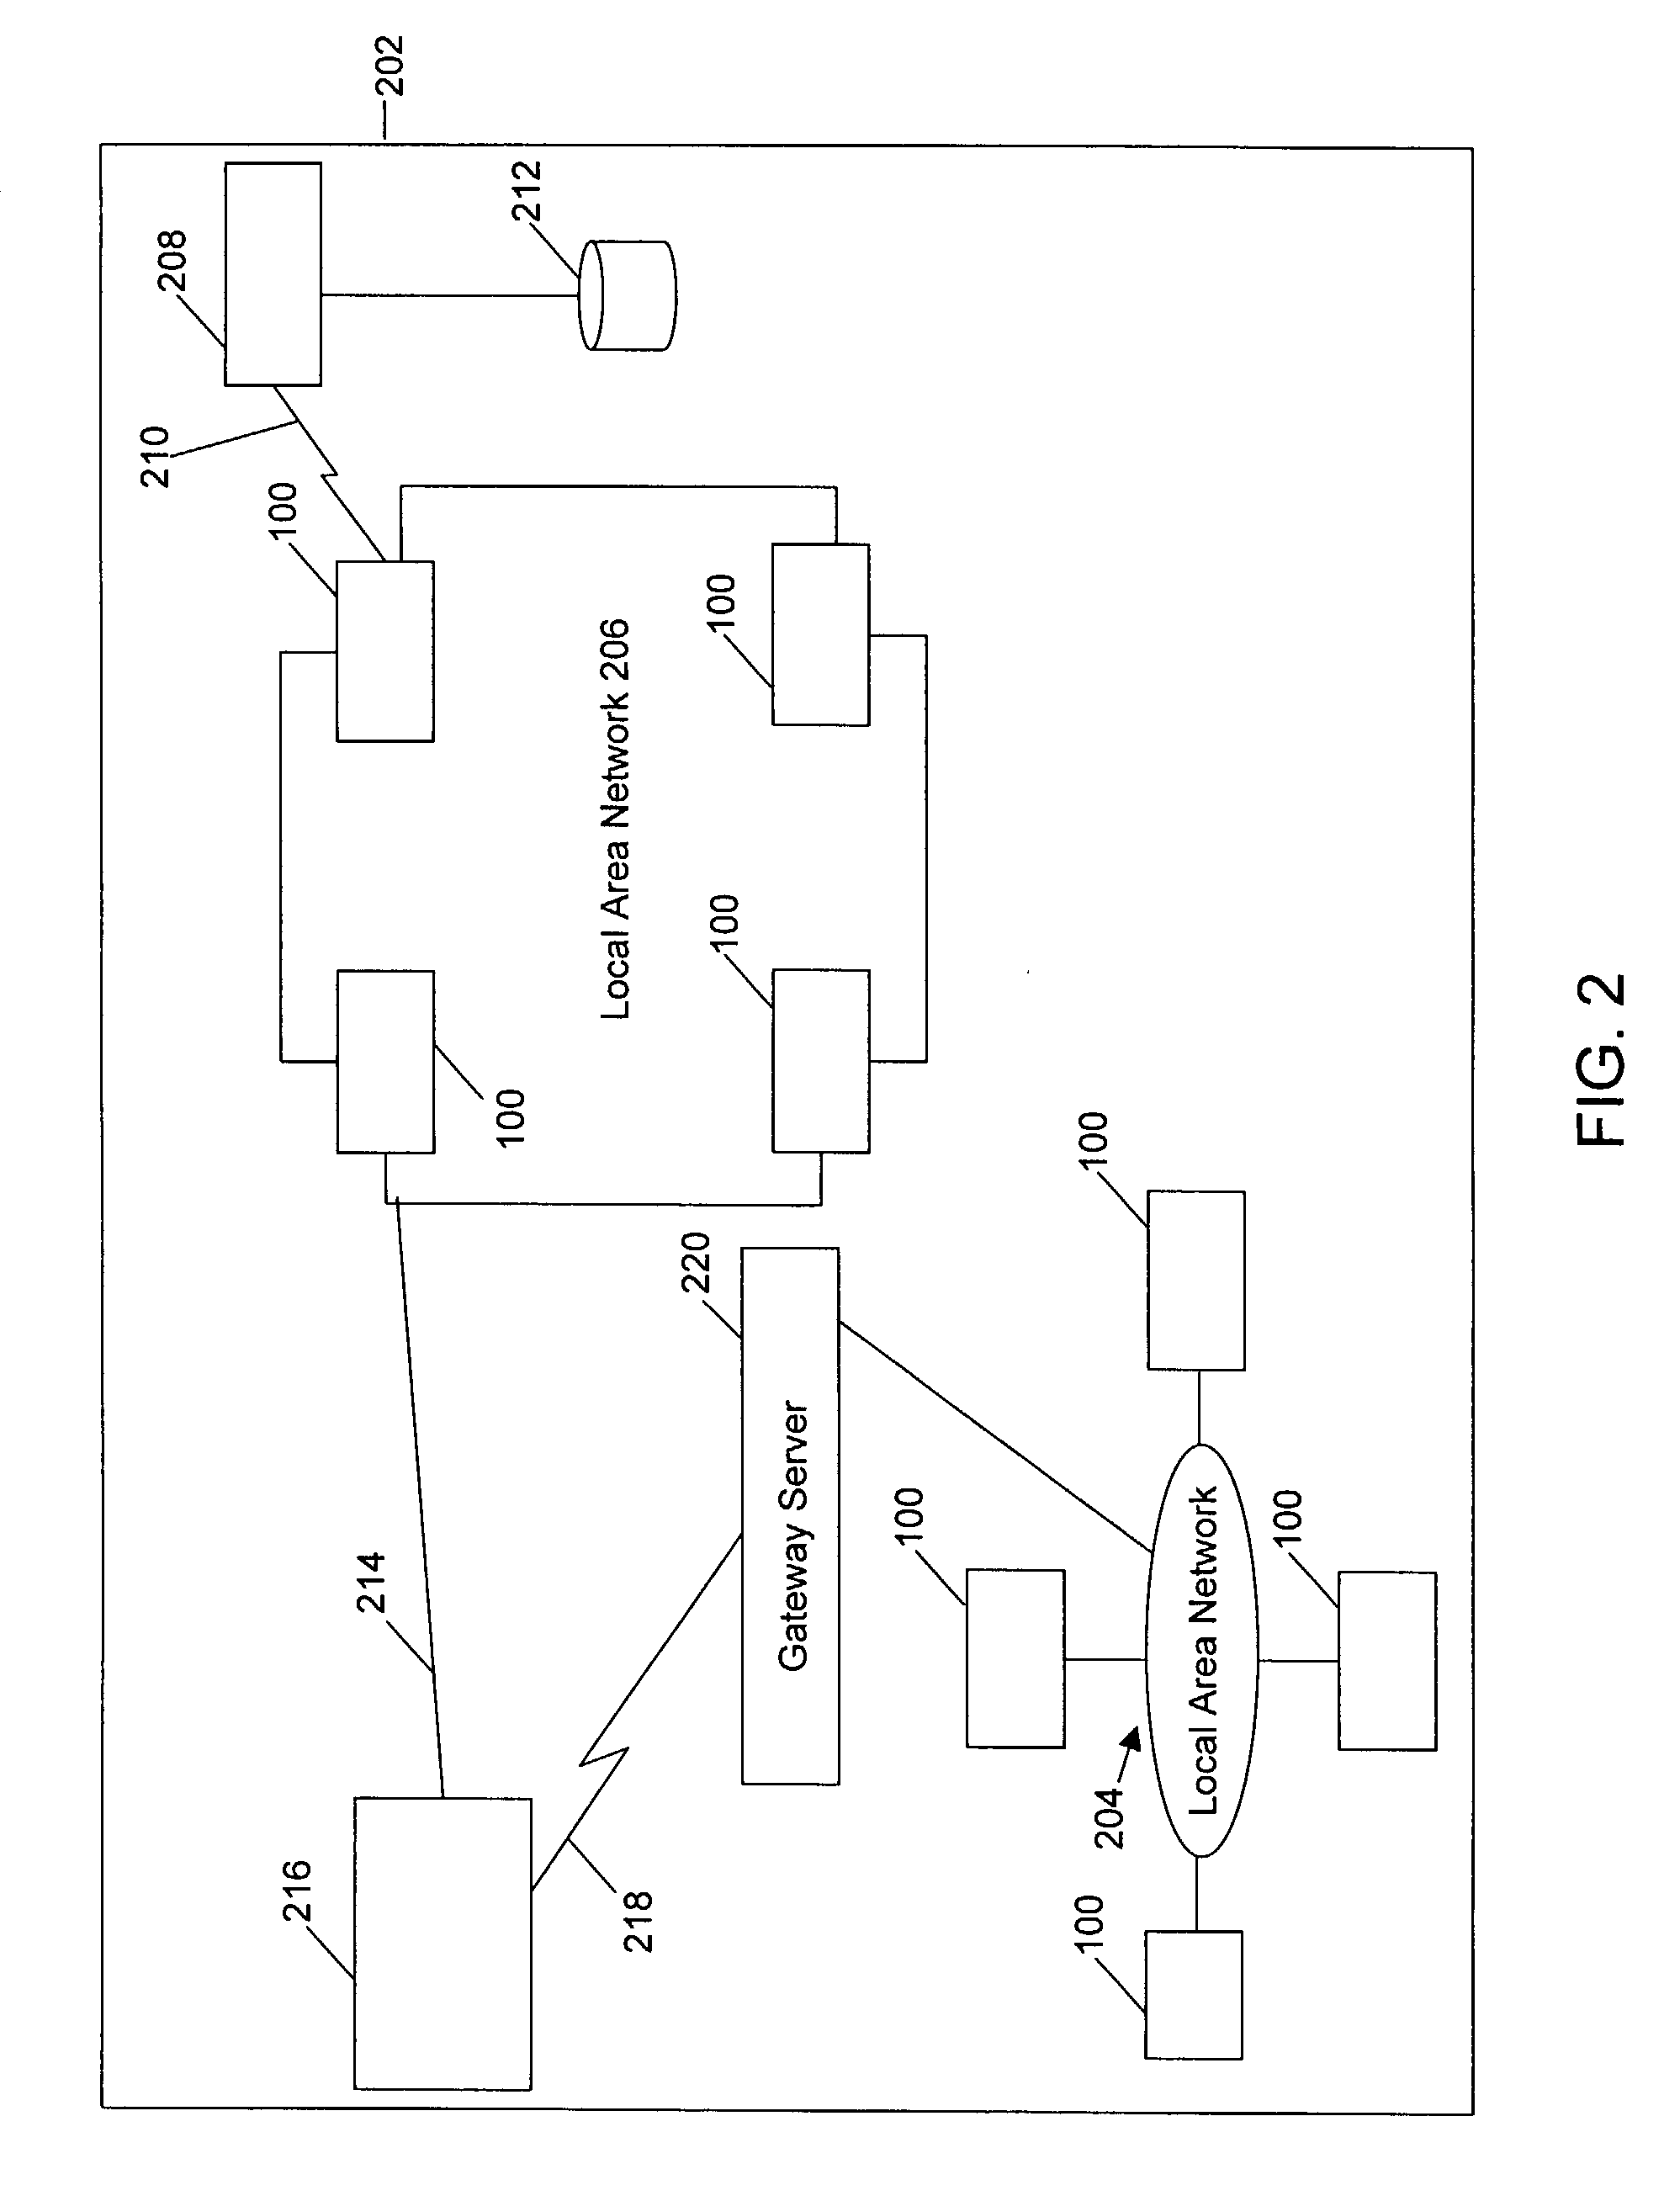 System and method for automatically discovering a hierarchy of concepts from a corpus of documents